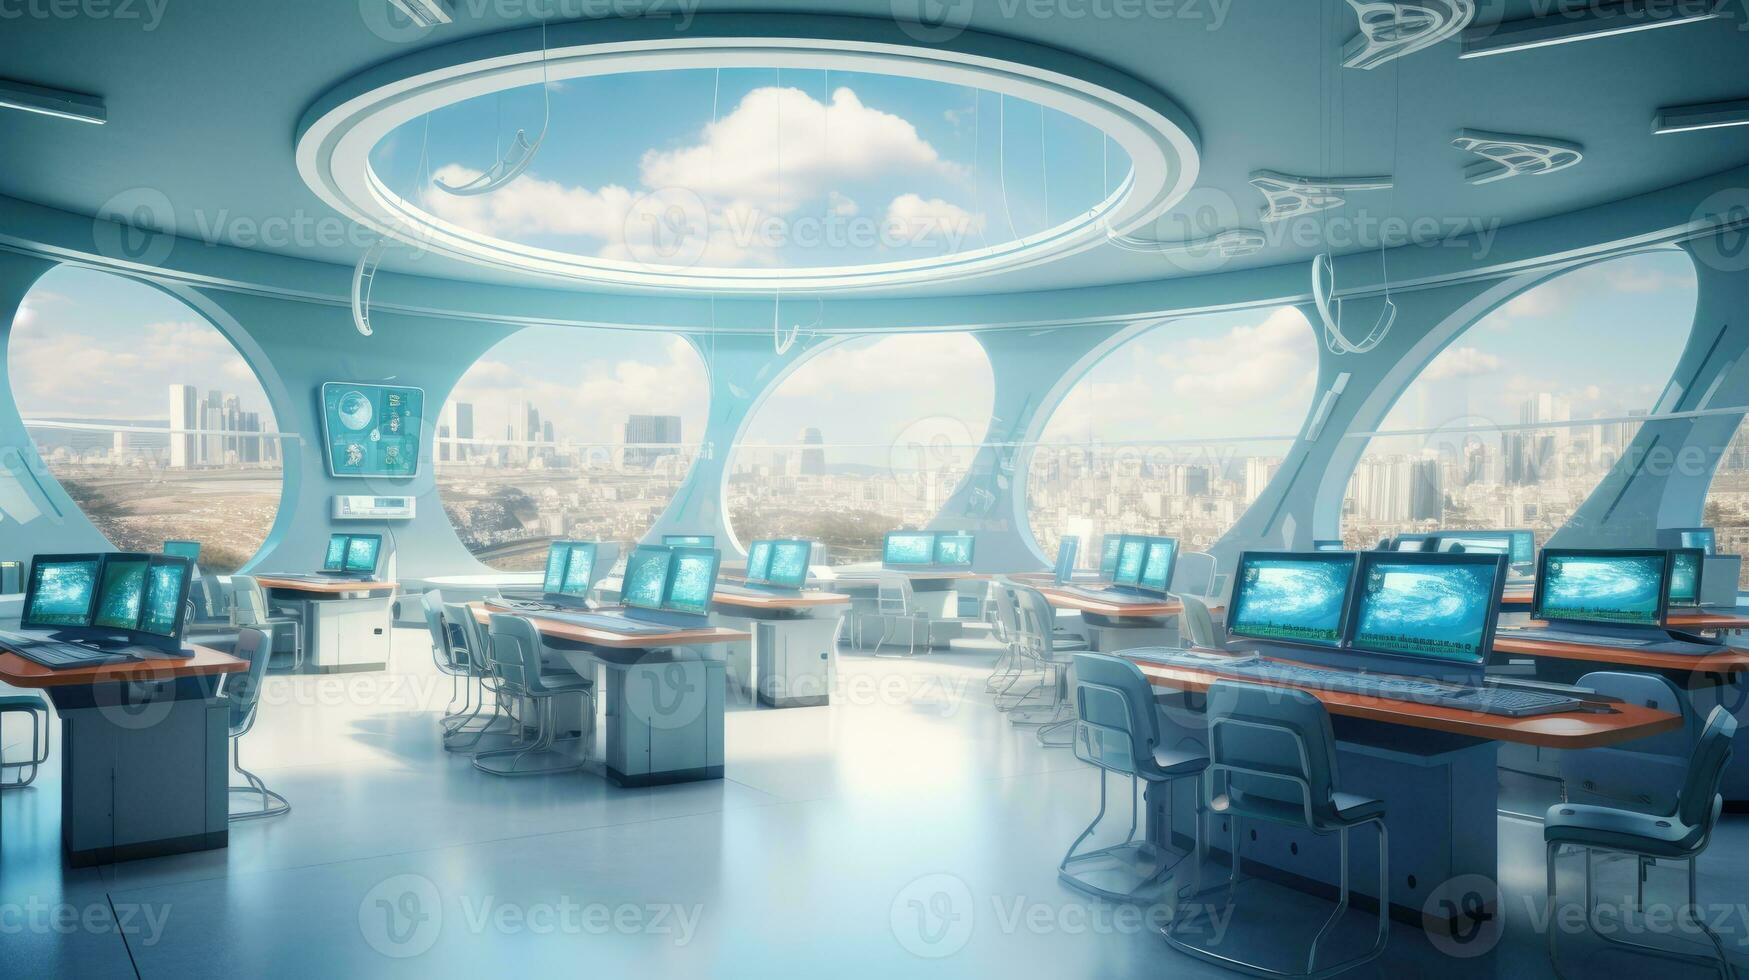 Futuristic classroom in school of the future. Classroom for classes or lectures photo